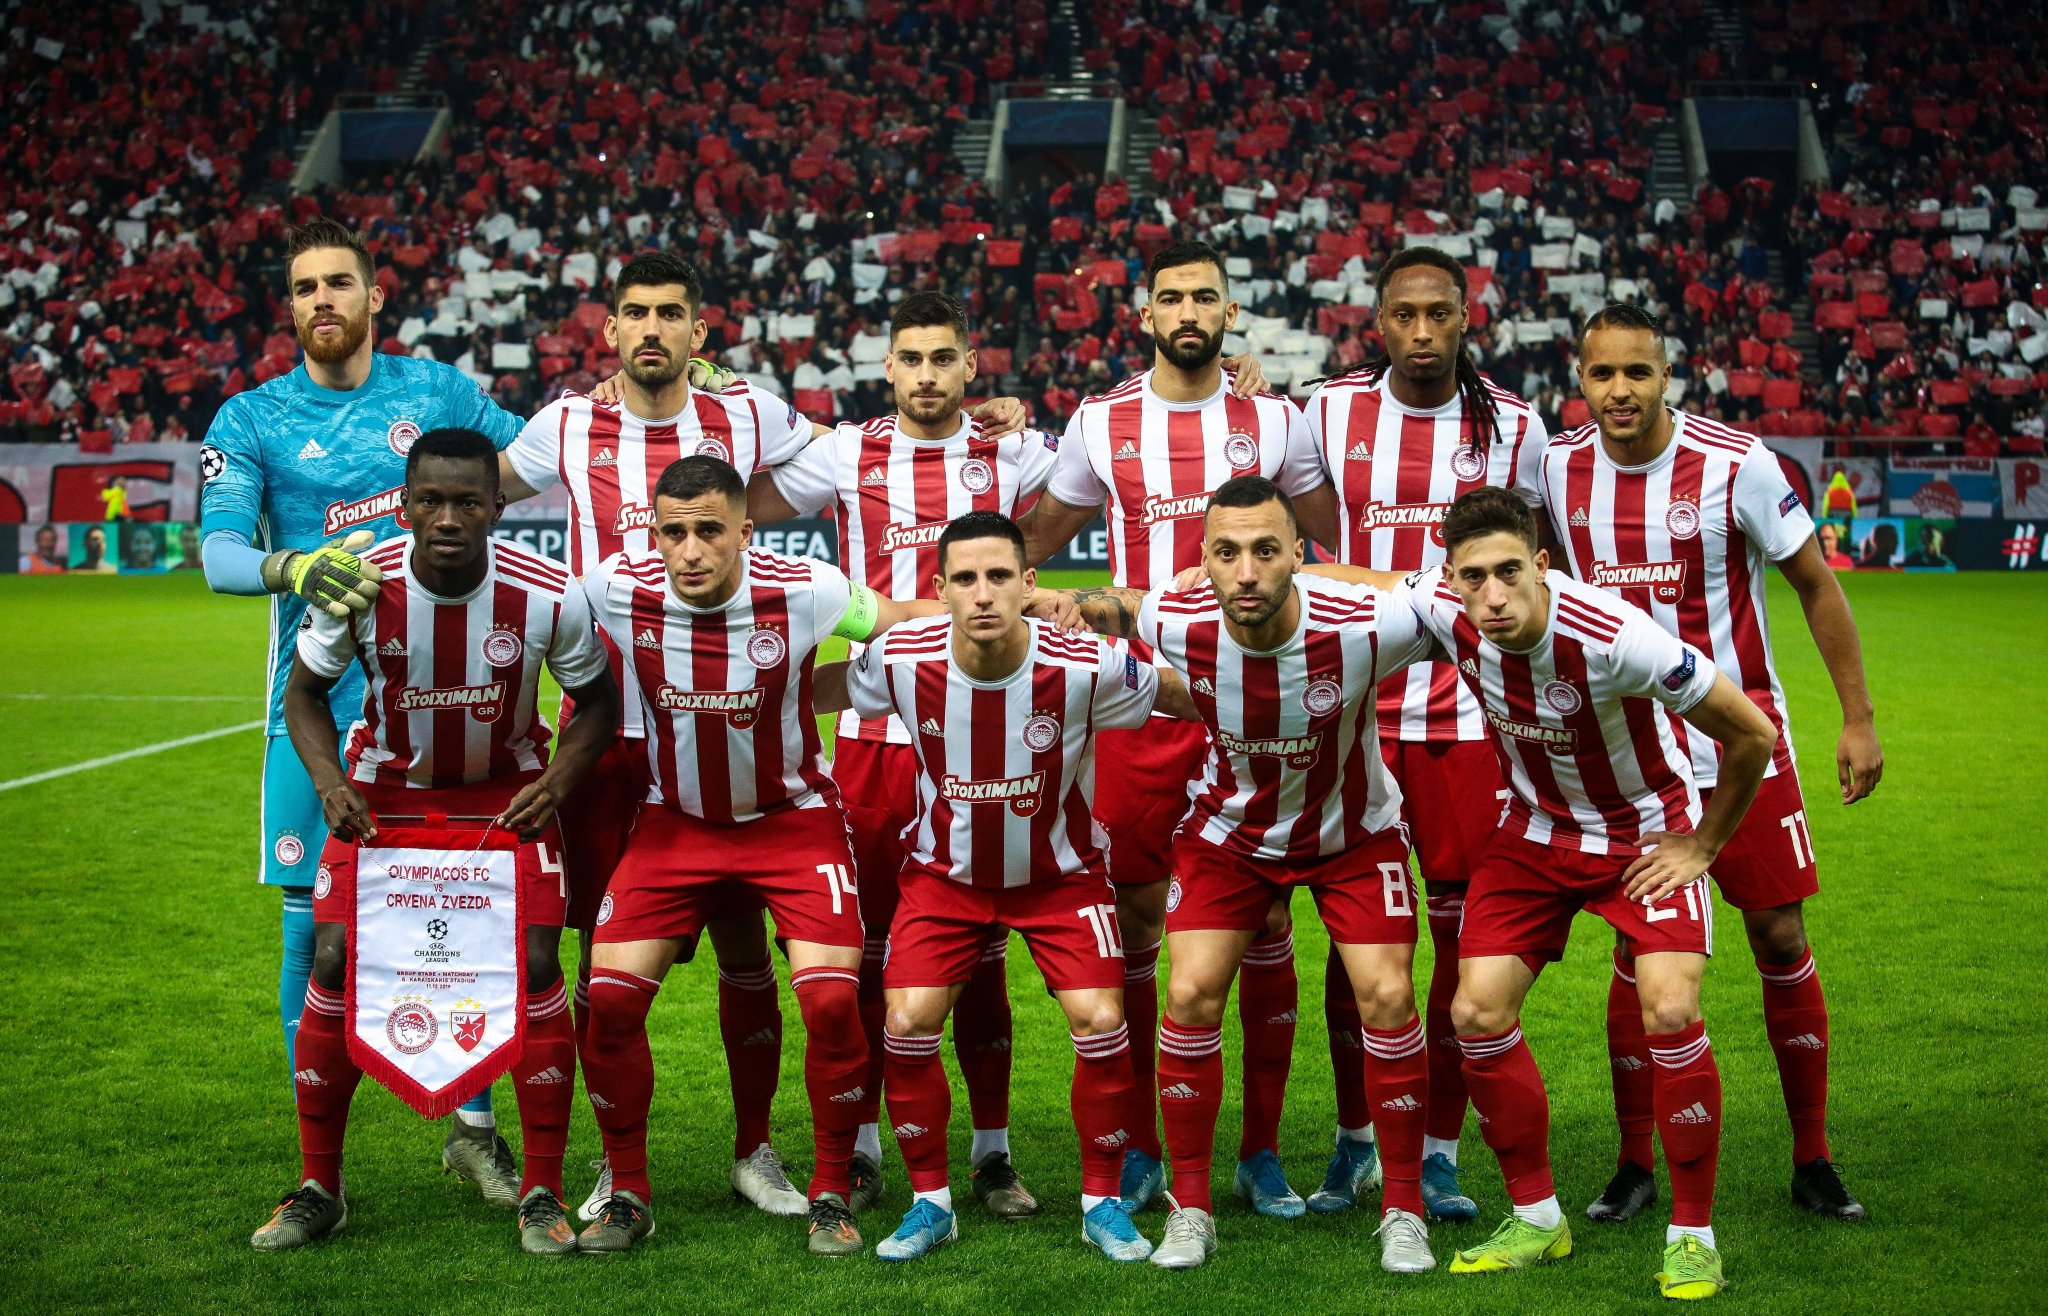 Olympiacos FC (47🏆) a Tuwita: "TEAM = FAMILY! 🔴⚪️ #Olympiacos #UCL #UEL  #OLYCZV #Greece #Football #WeKeepOnDreaming https://t.co/1M2qpt1hLR" /  Tuwita